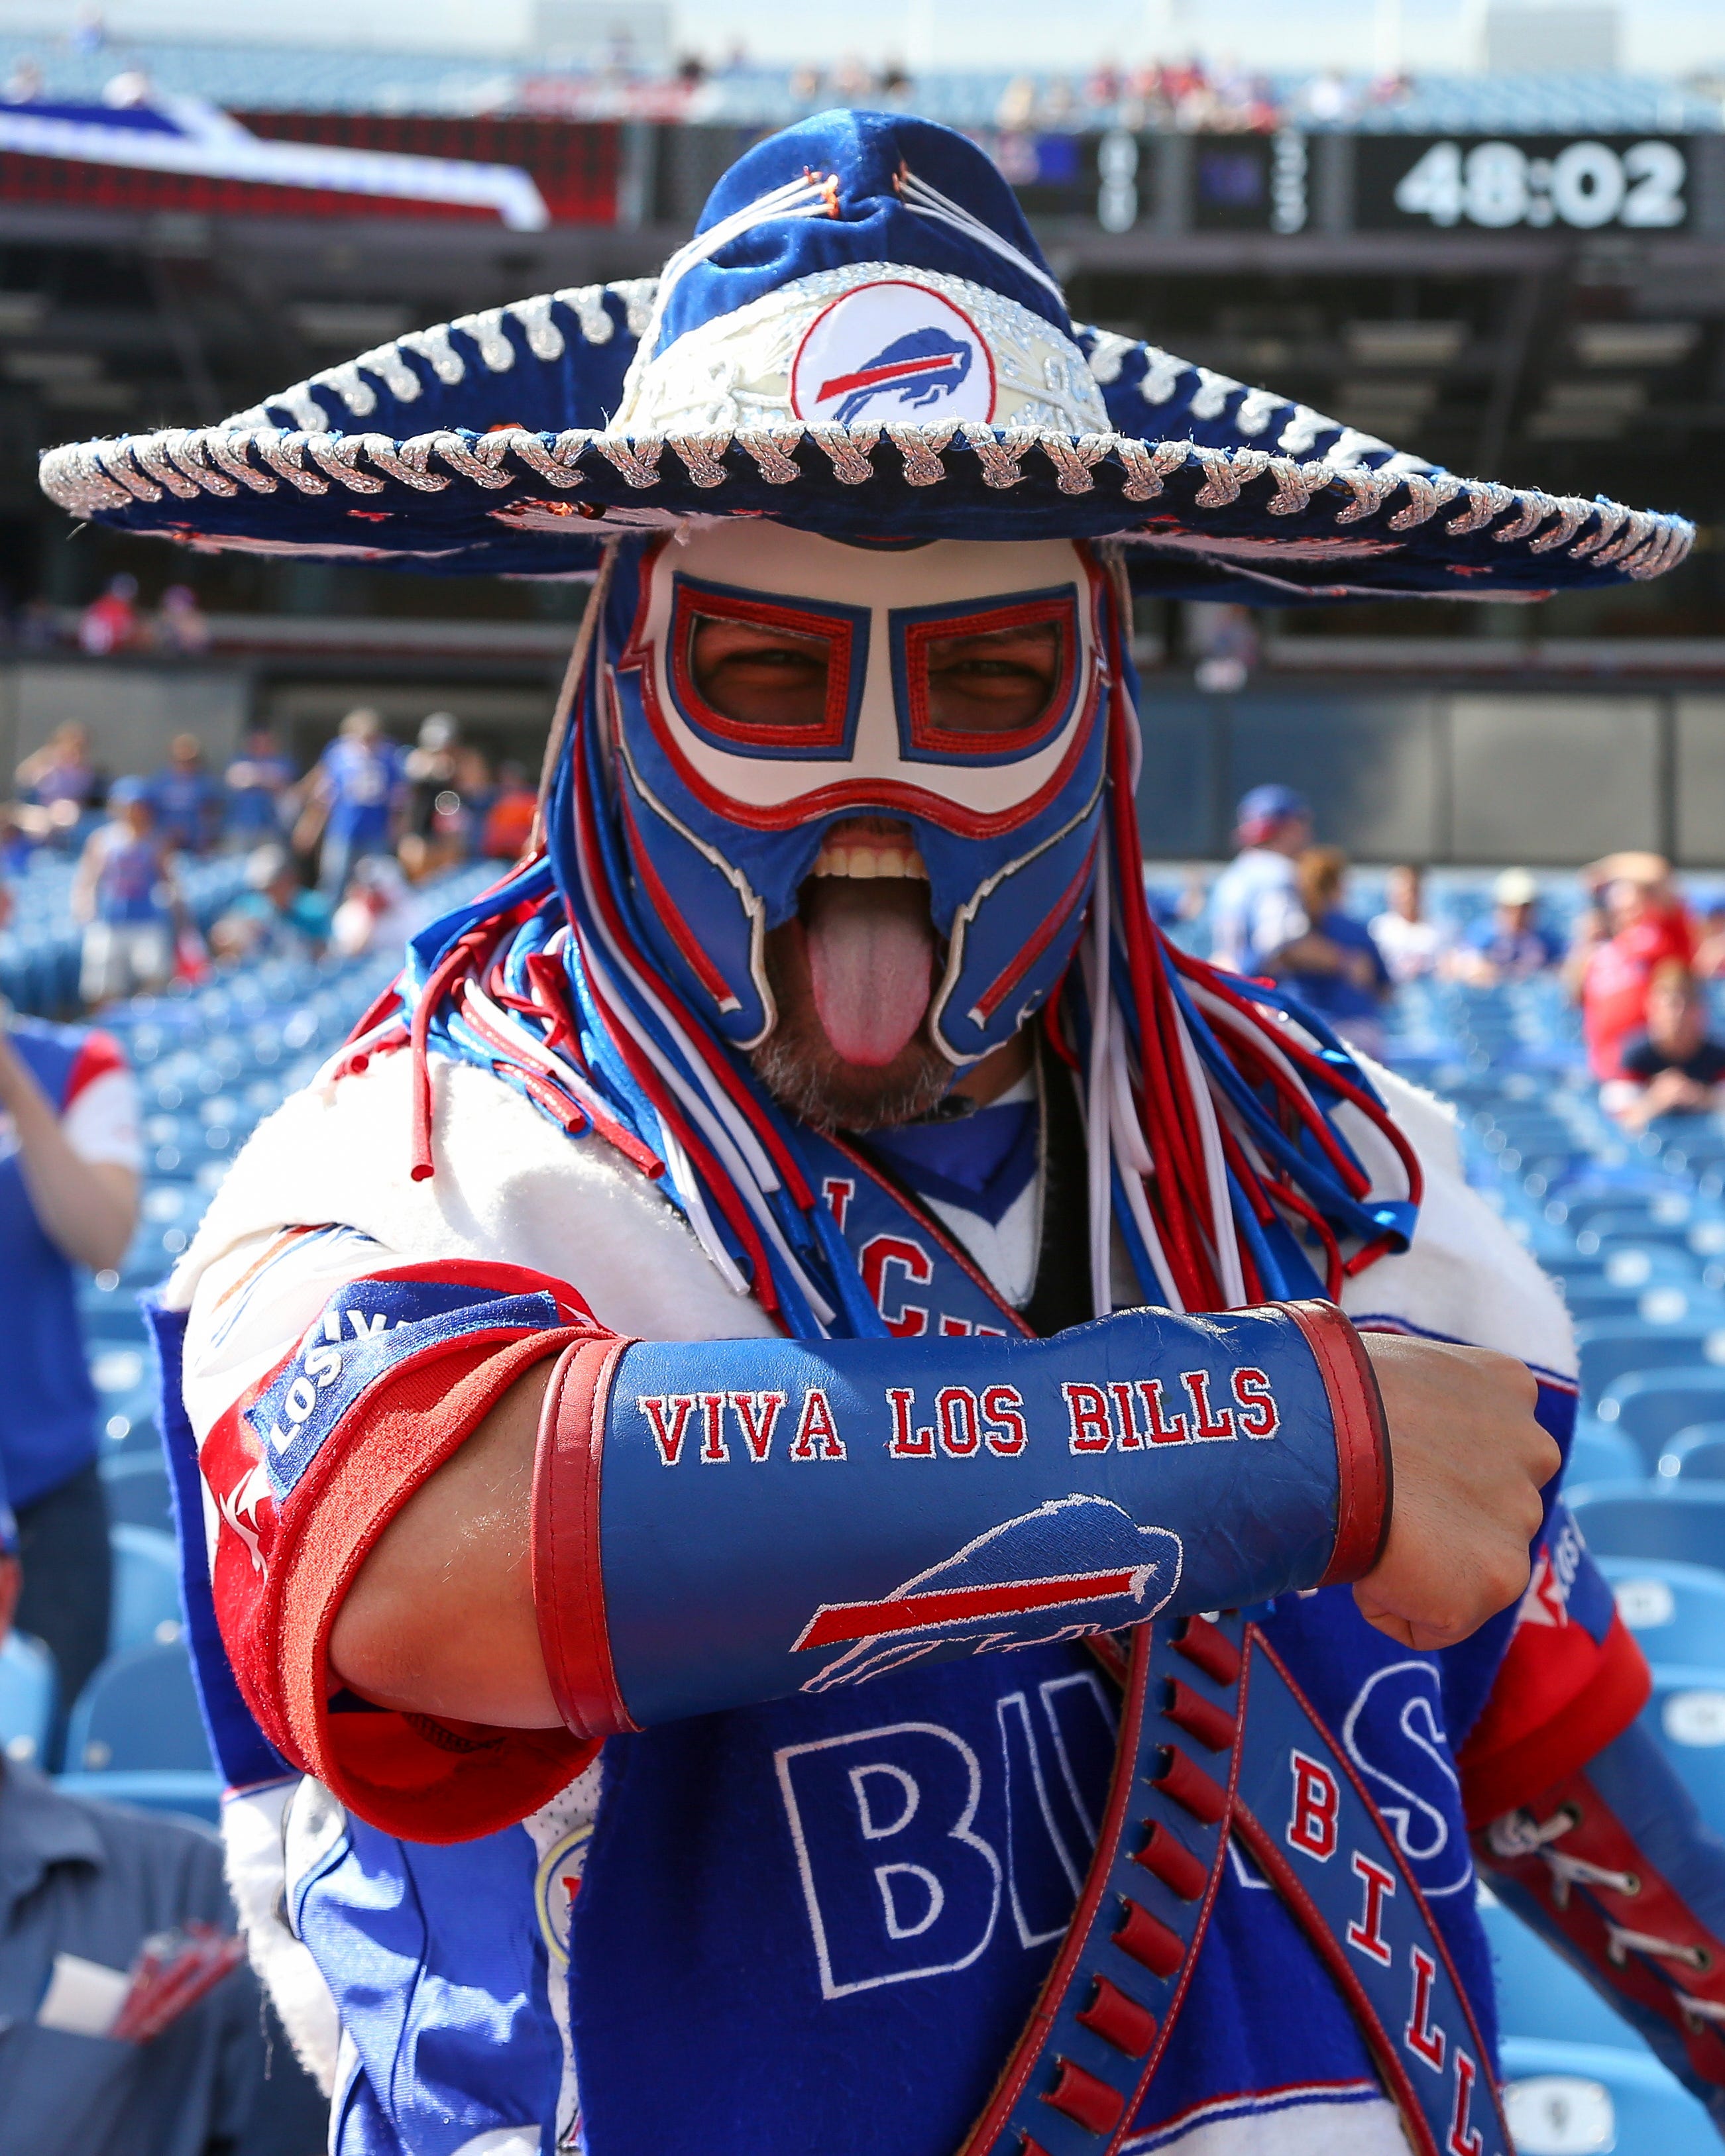 utilgivelig Bølle Borger Pancho Billa: Buffalo Bills fan dies and is remembered on Twitter